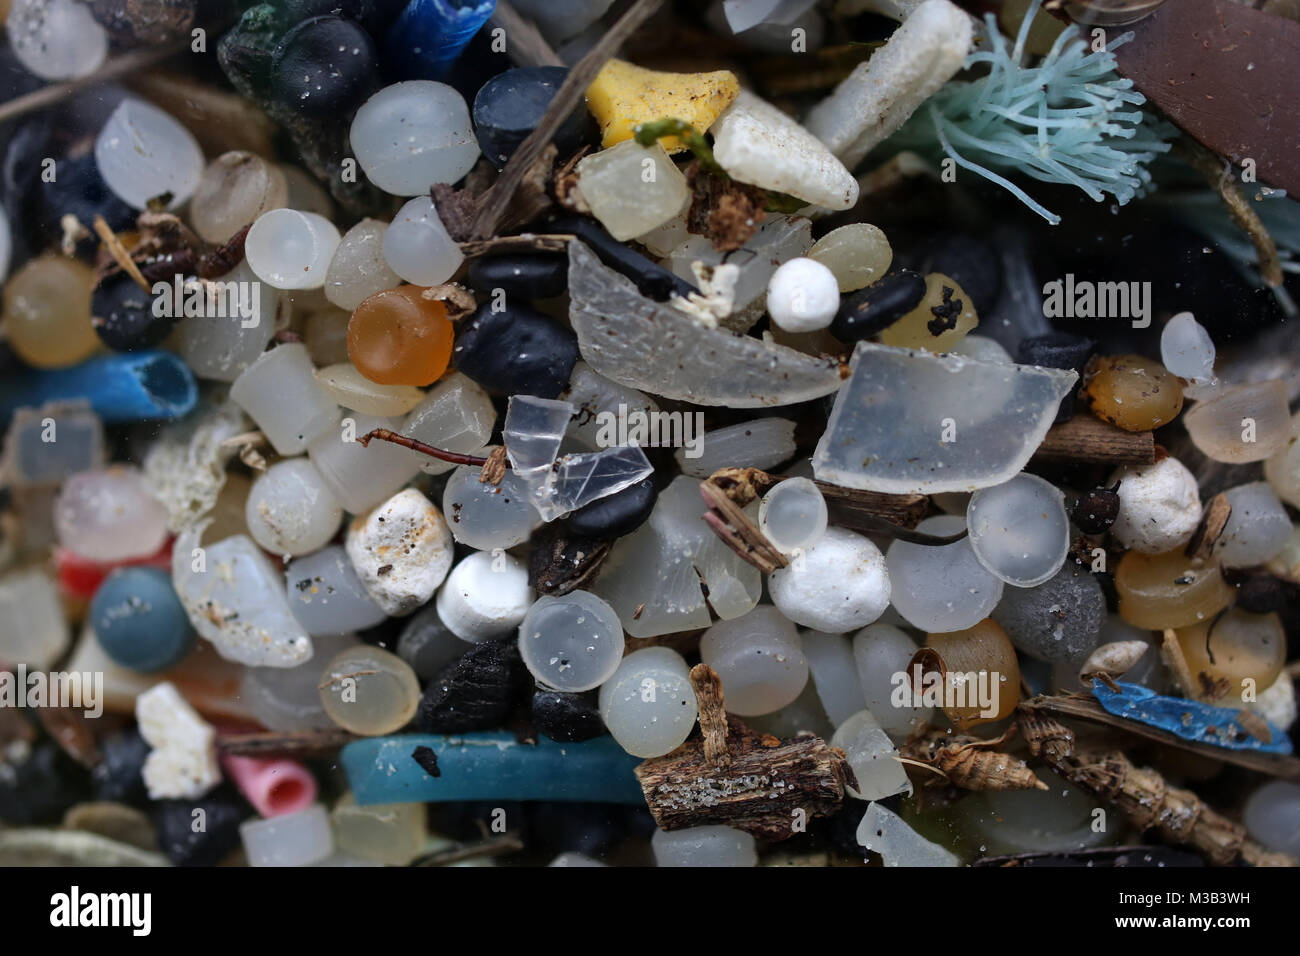 West Wittering Beach, West Sussex, UK. A huge beach clean pictured with members of the public collecting plastic from the beach alongside the Surfers Against Sewage group.  Saturday 10th February 2018 © Sam Stephenson/Alamy Live News. Stock Photo